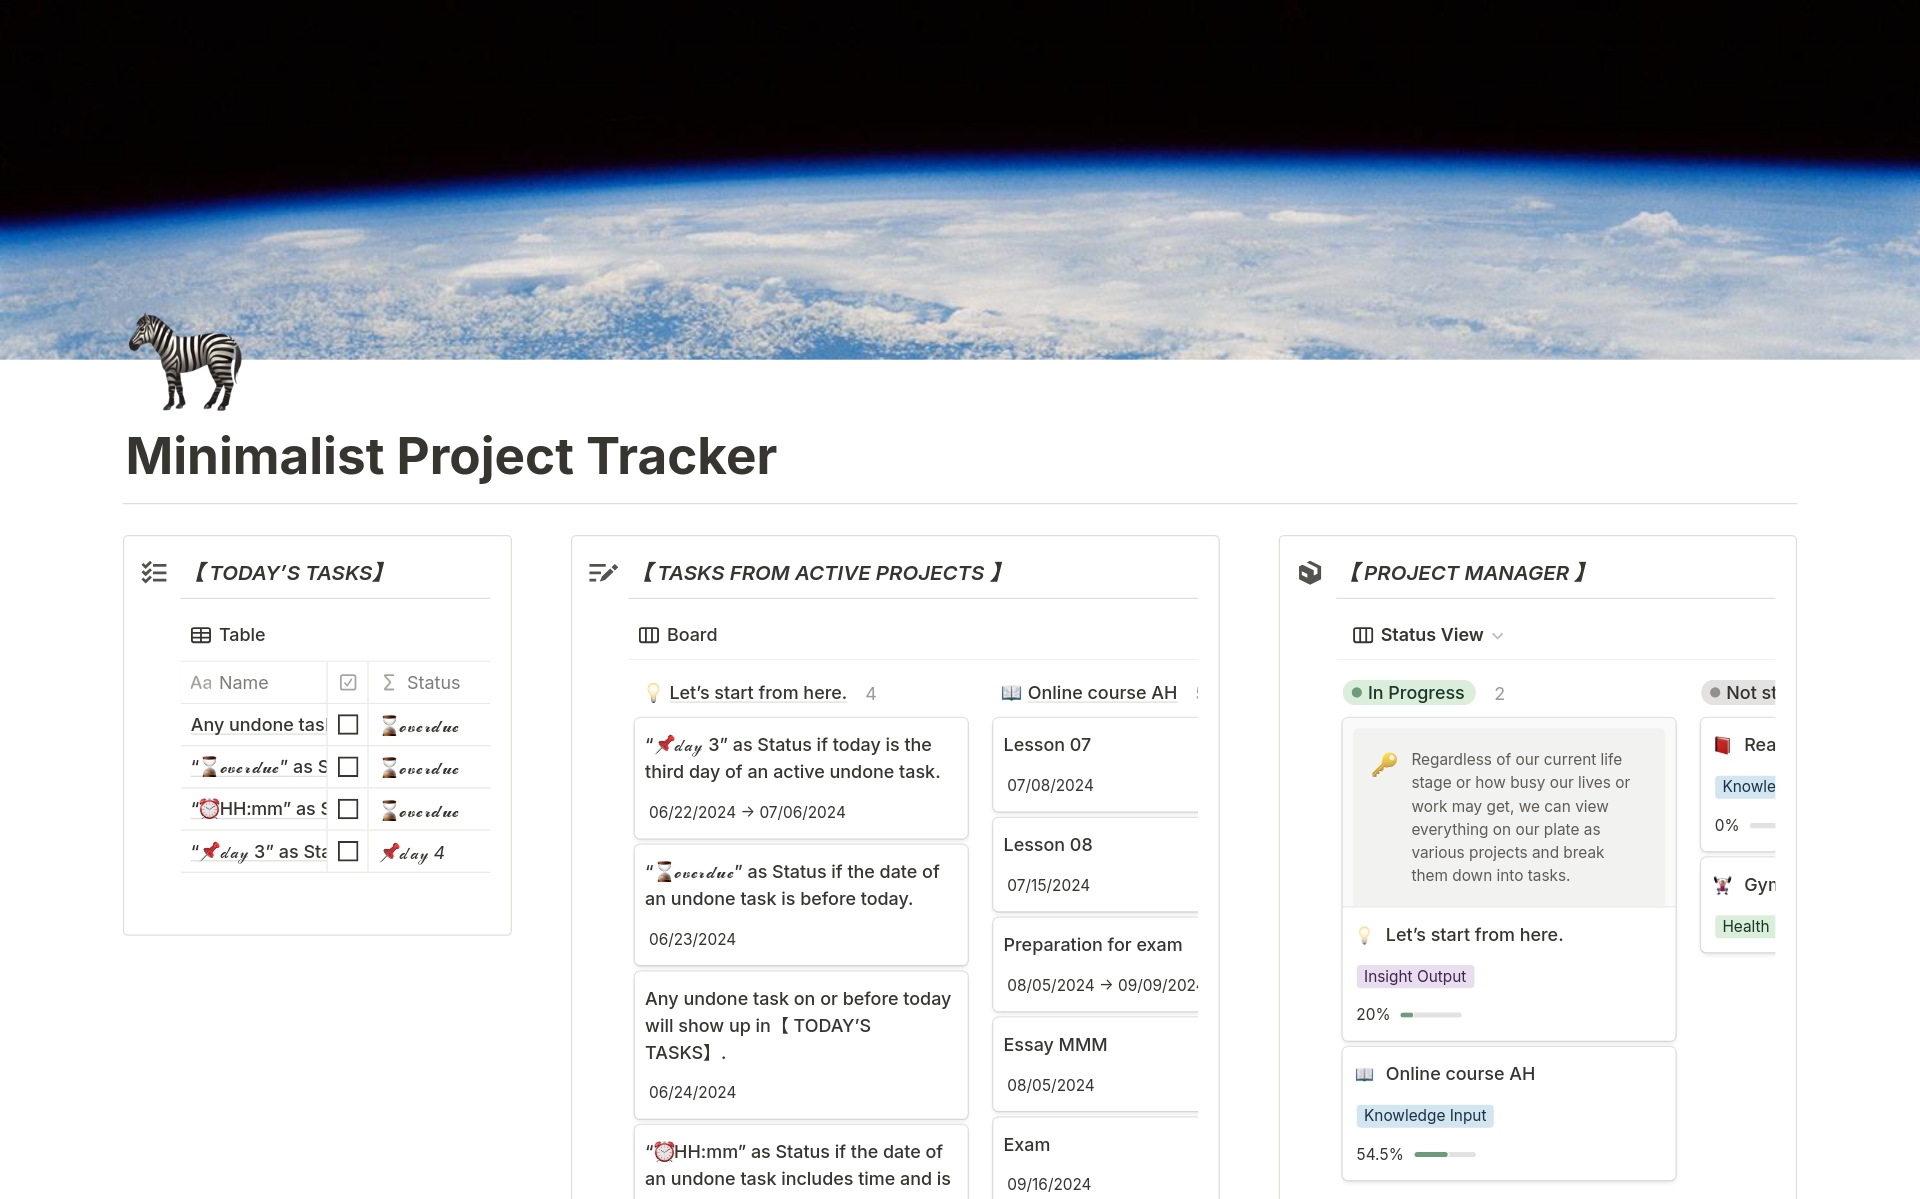 A template preview for Task Tracker On Multiple Projects